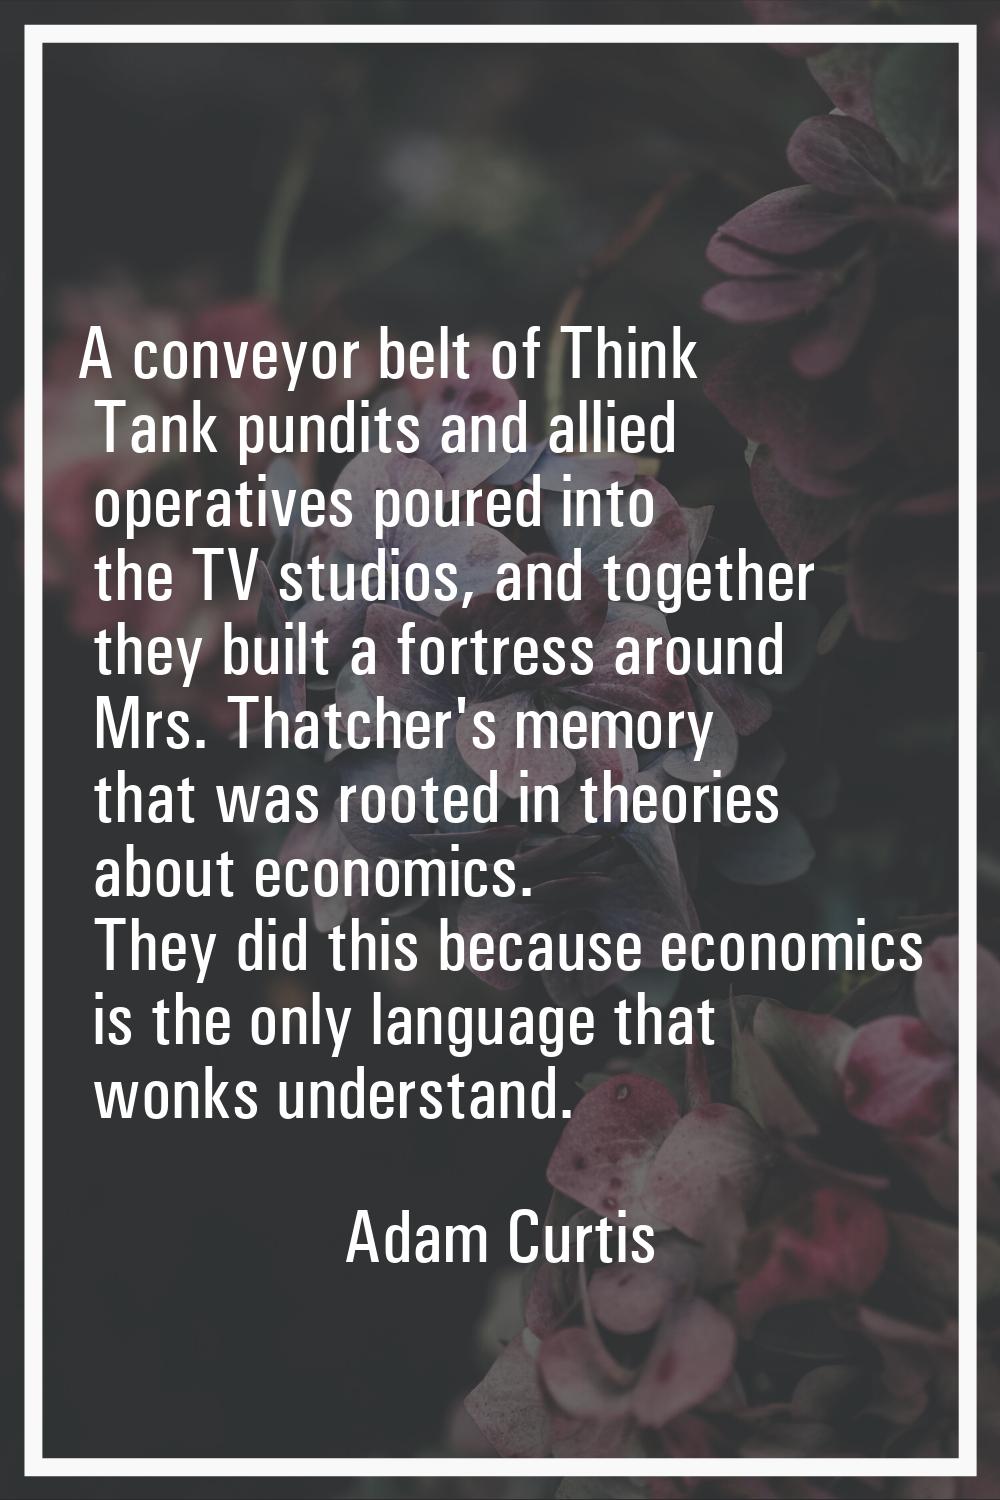 A conveyor belt of Think Tank pundits and allied operatives poured into the TV studios, and togethe